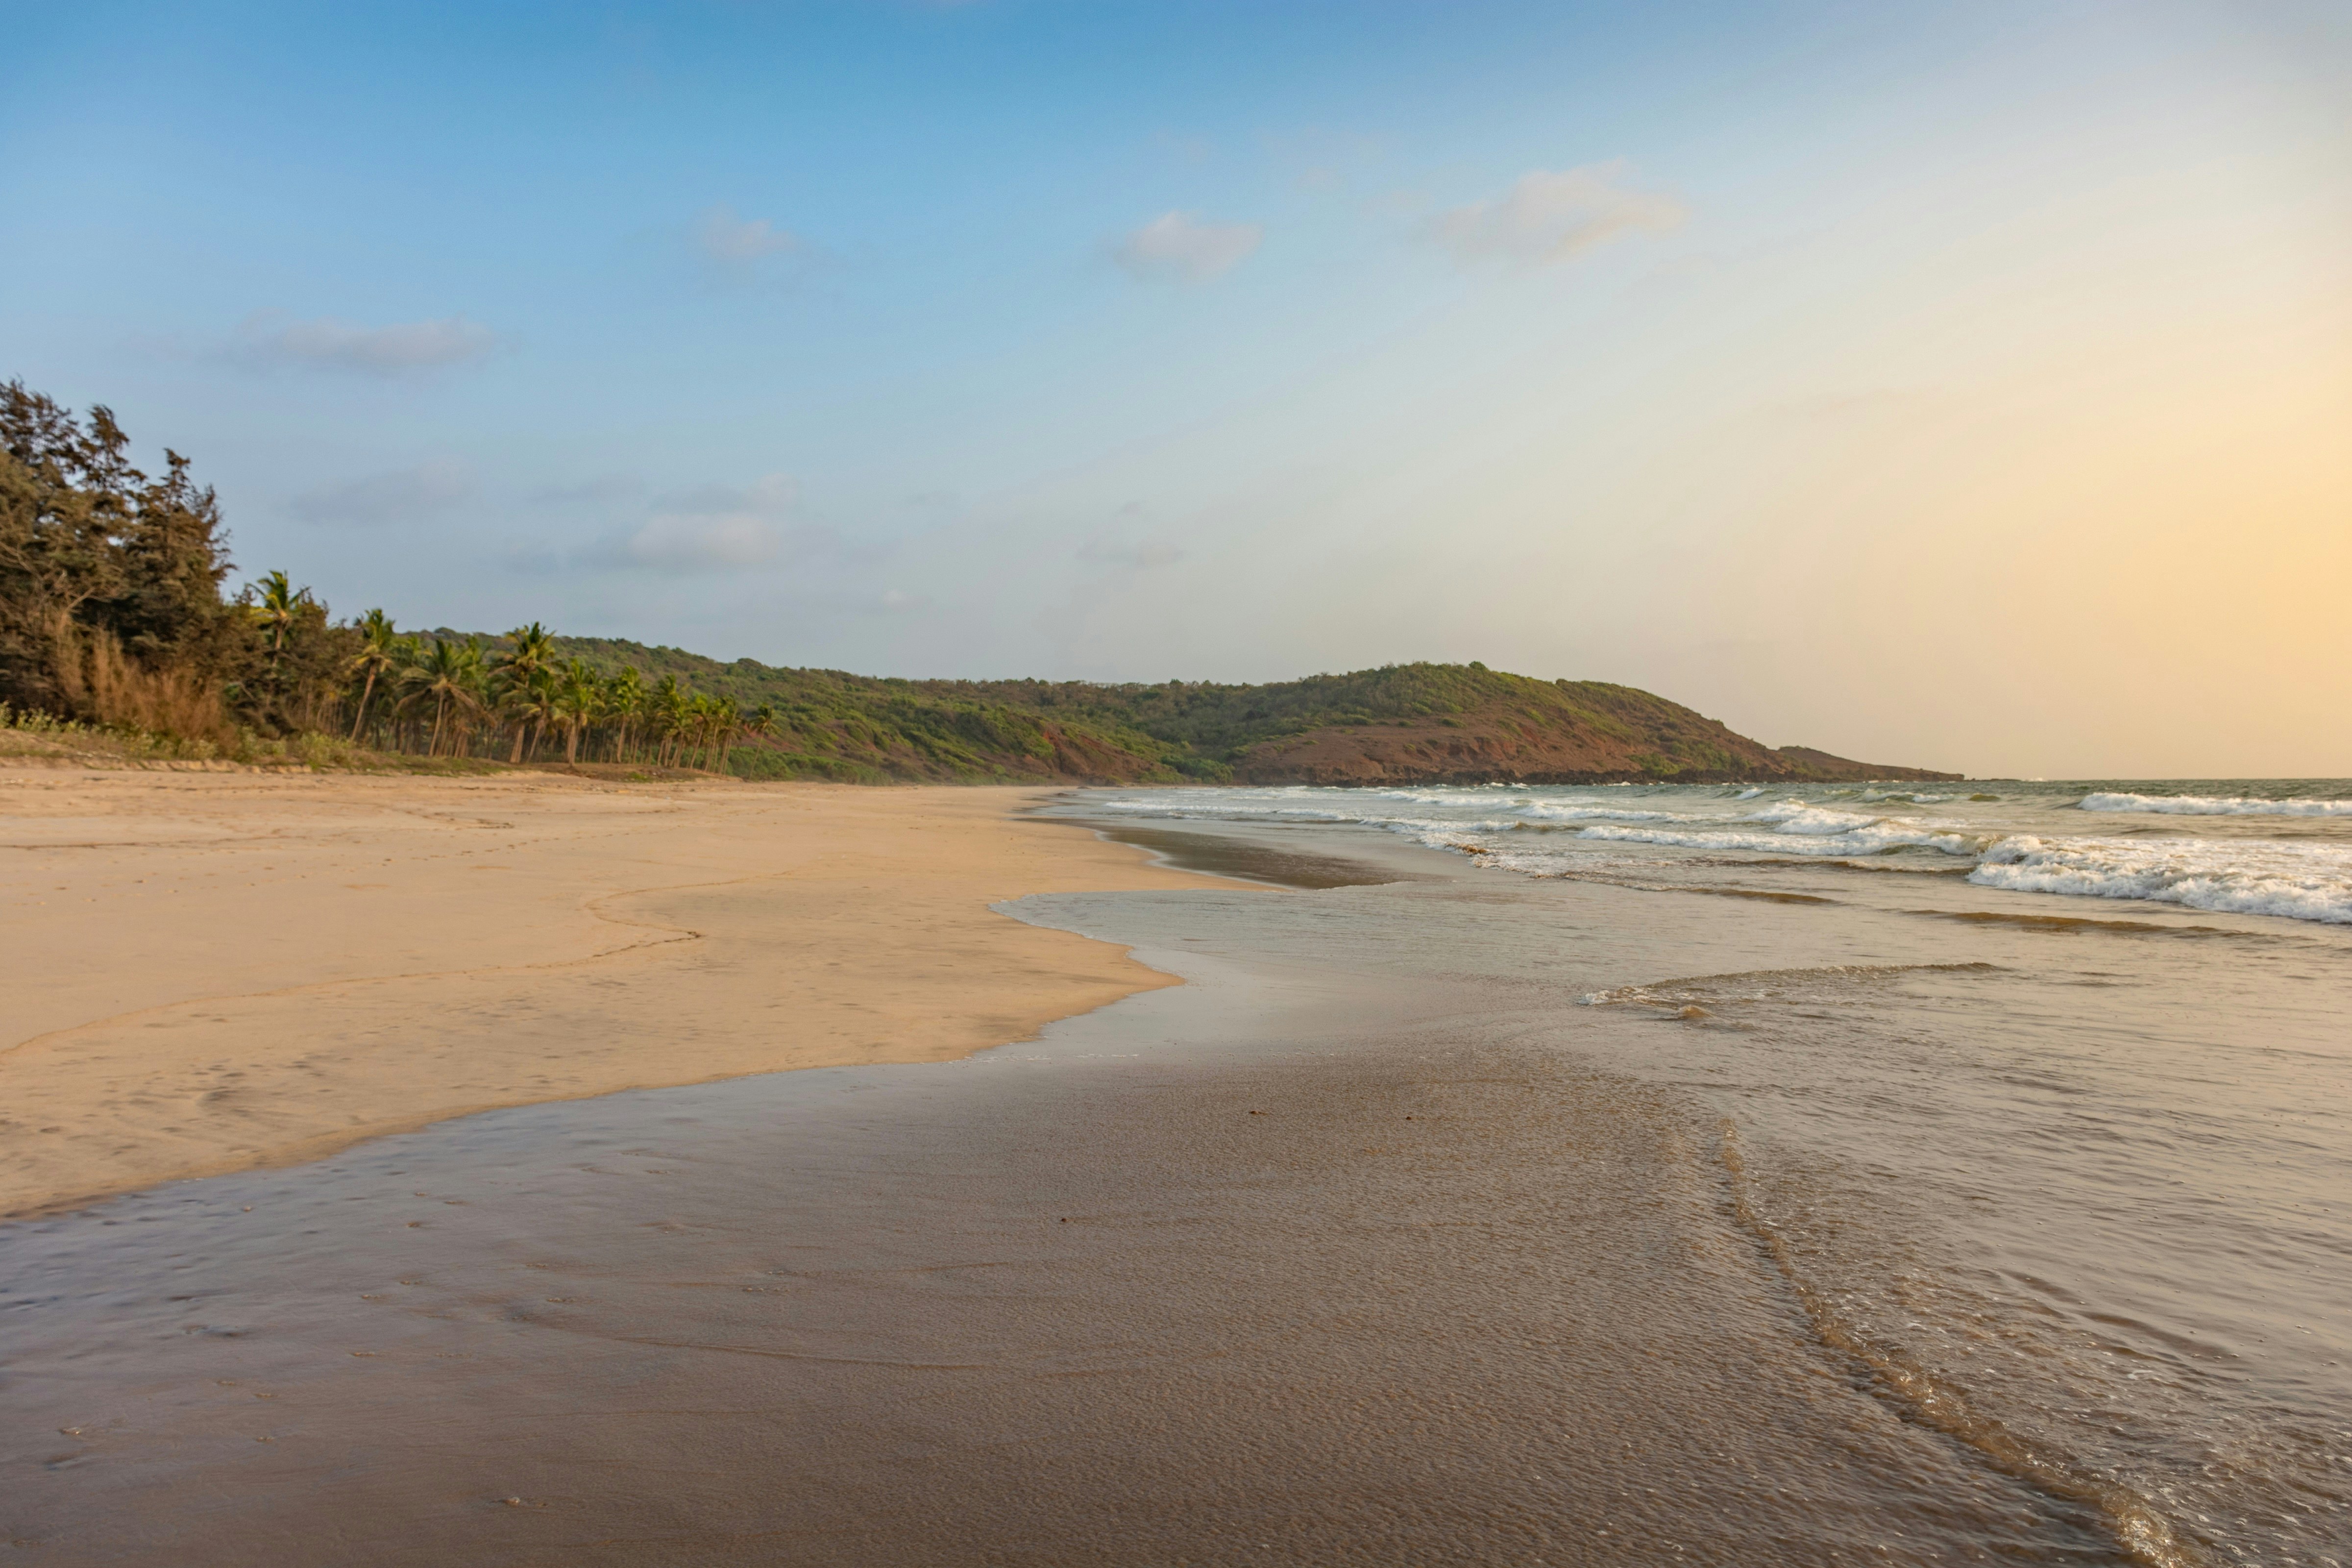 The golden sands of Ganpatipule beach. The waves lap the shoreline, which is completely empty and backed by forest.